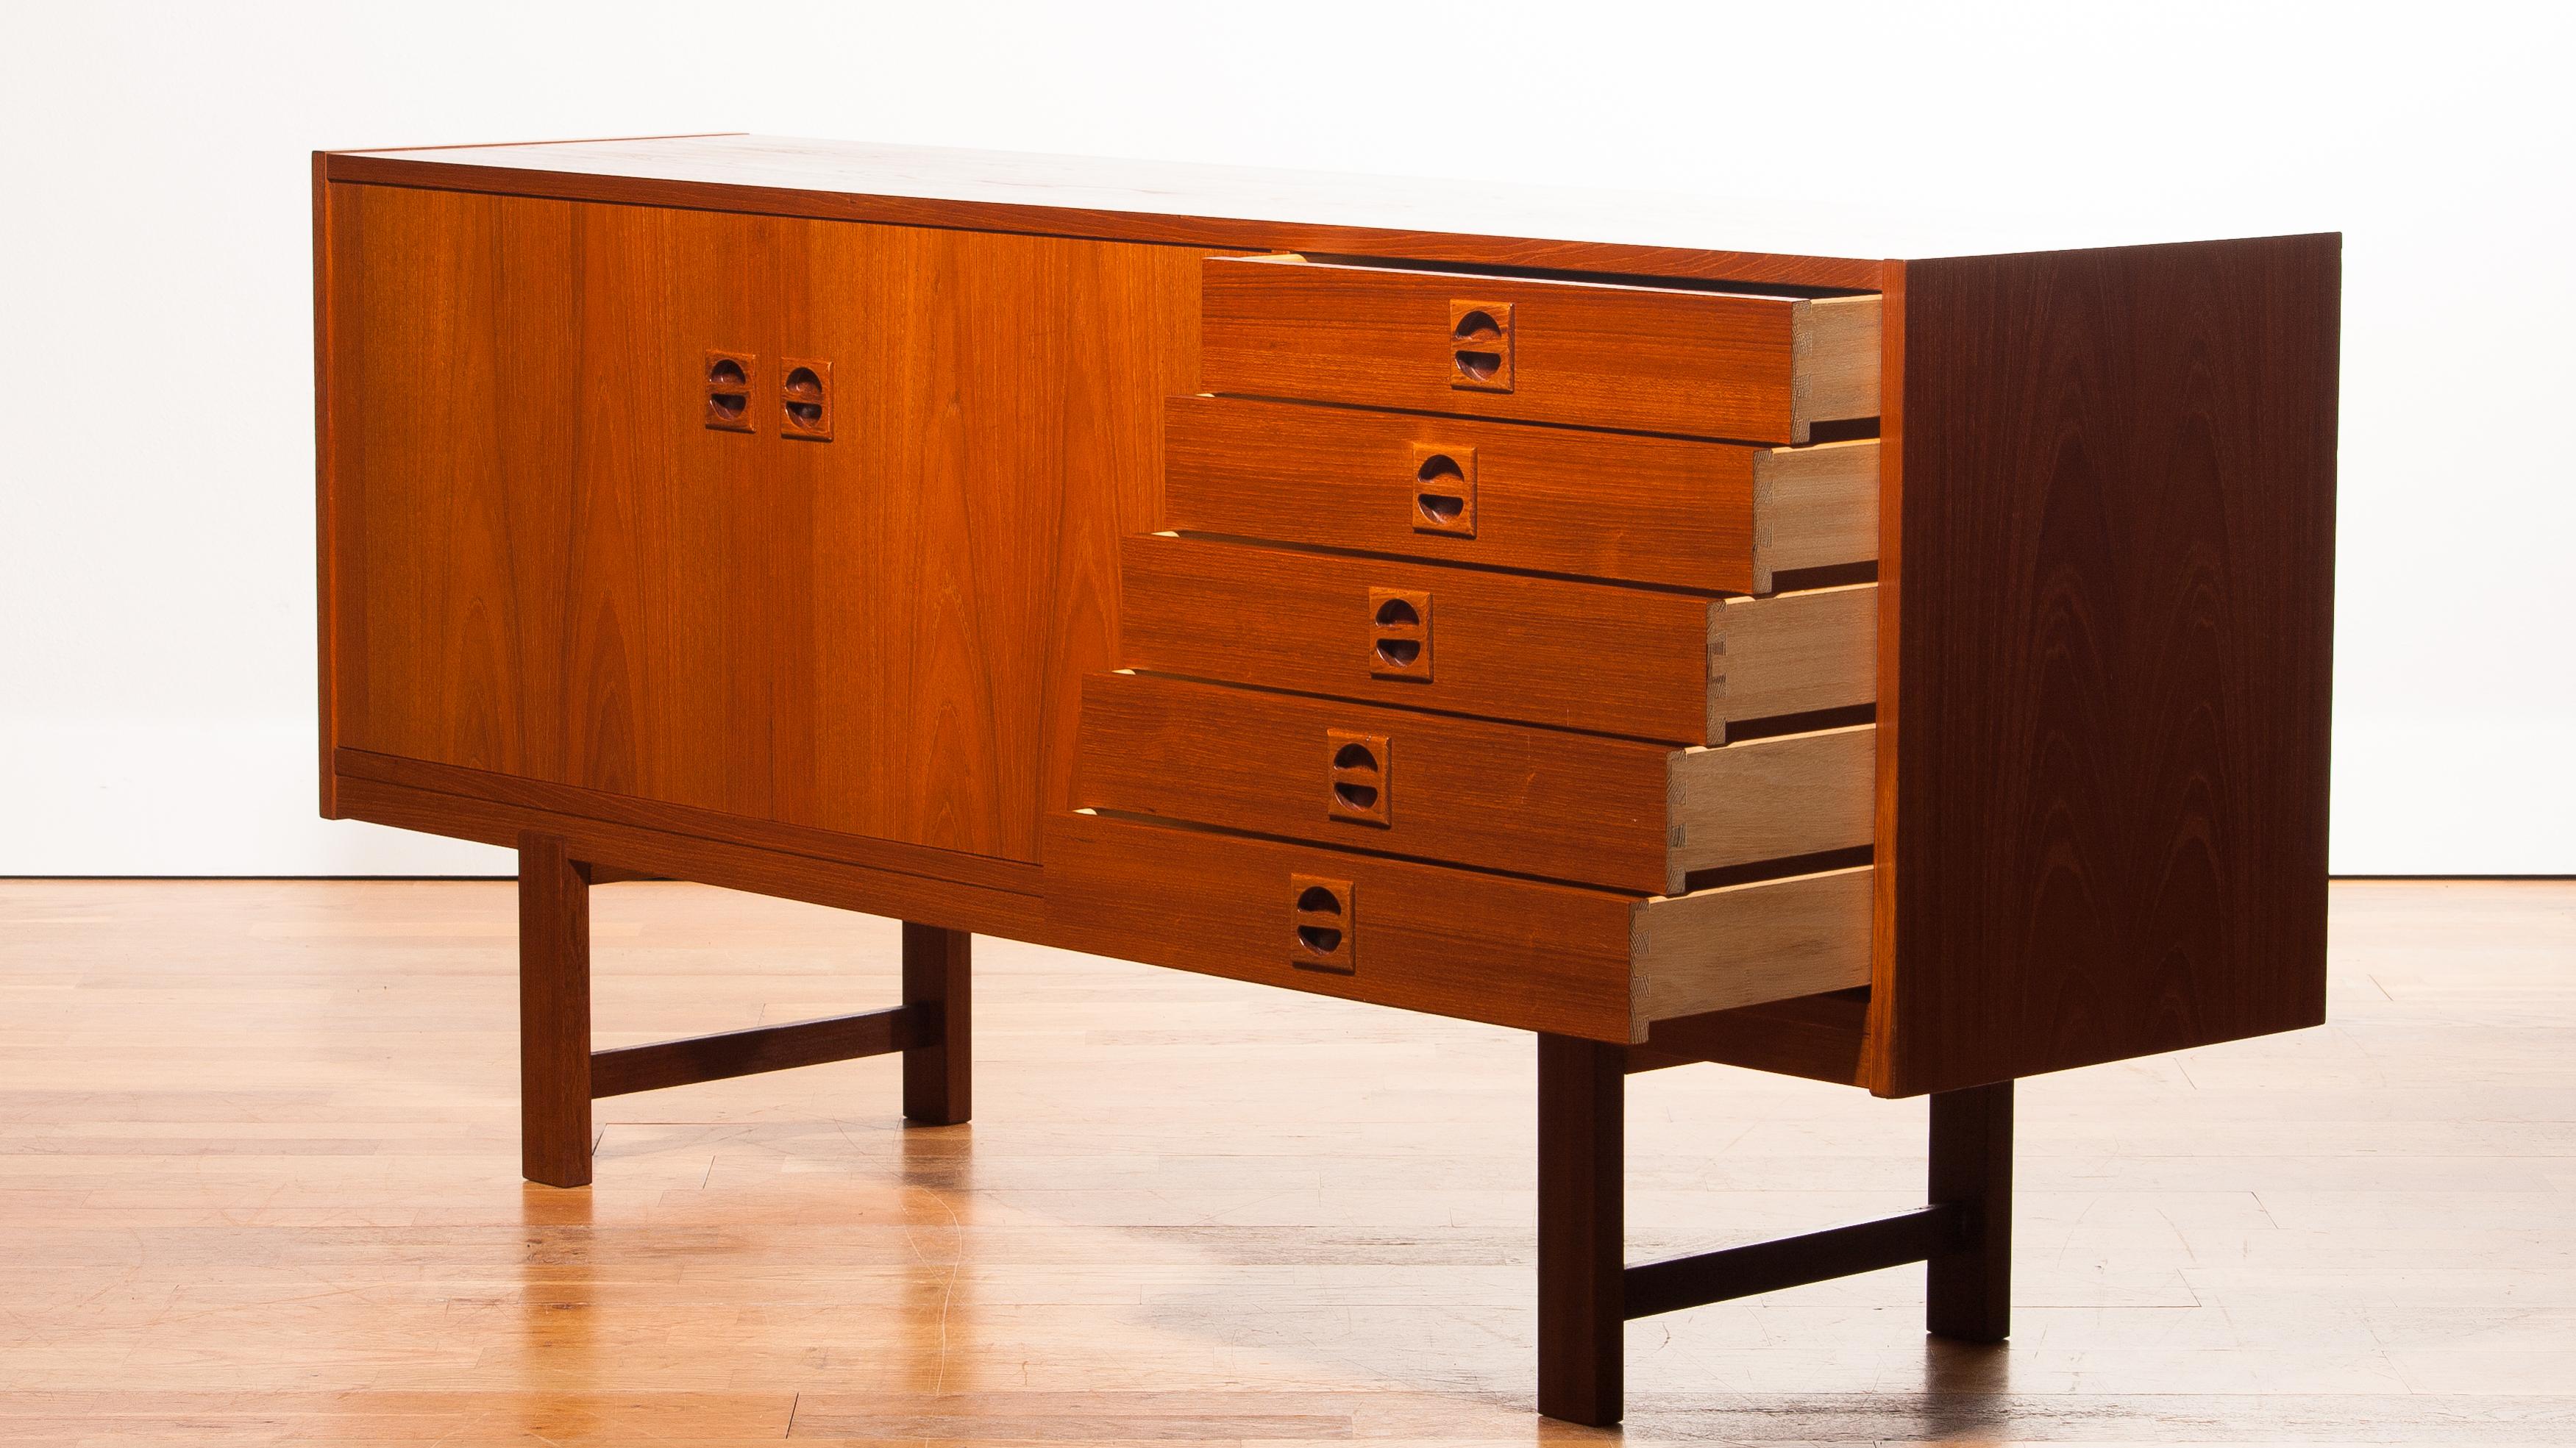 Beautiful sideboard designed by Erik Wørts, Denmark.
The cabinet is made of a very nice teak veneer and has five drawers and two doors.
It is in wonderful condition.
Period 1950s
Dimensions: H76 cm, W 164 cm, D 42 cm.